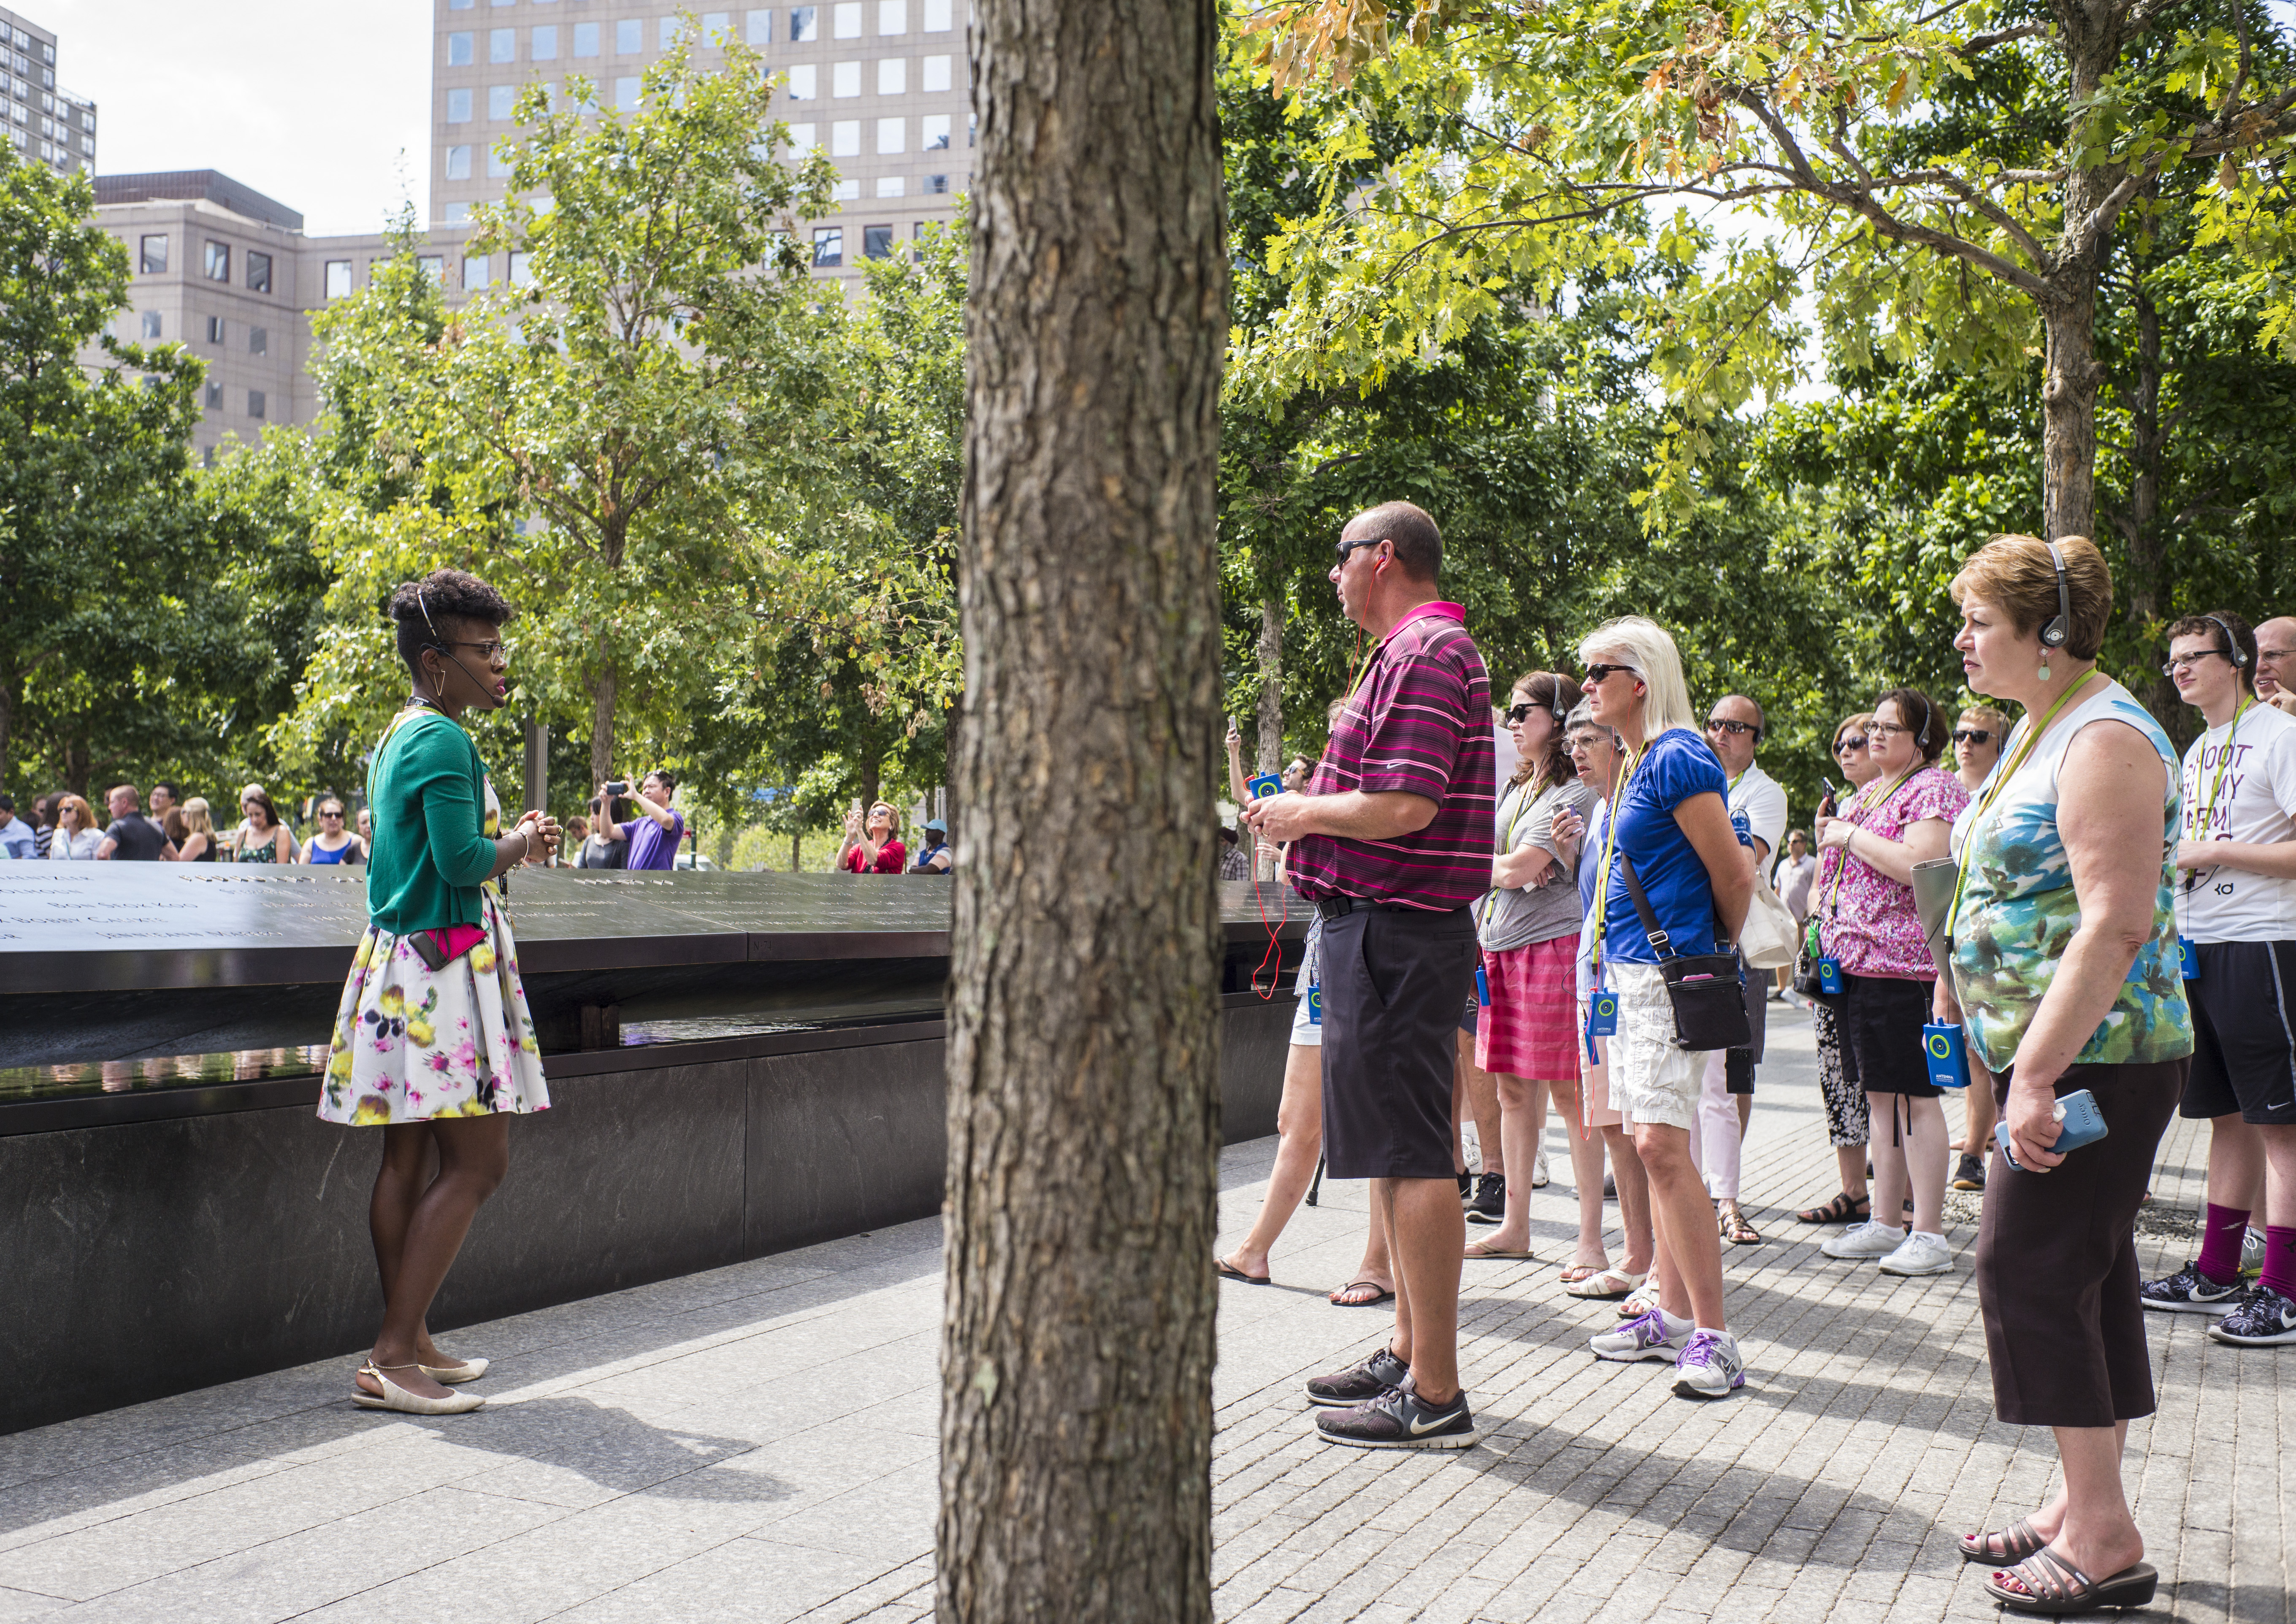 Nicole Richardson leads a tour on the 9/11 Memorial plaza. A group of visitors stand and watch her as she speaks in front of a reflecting pool on a sunny day.